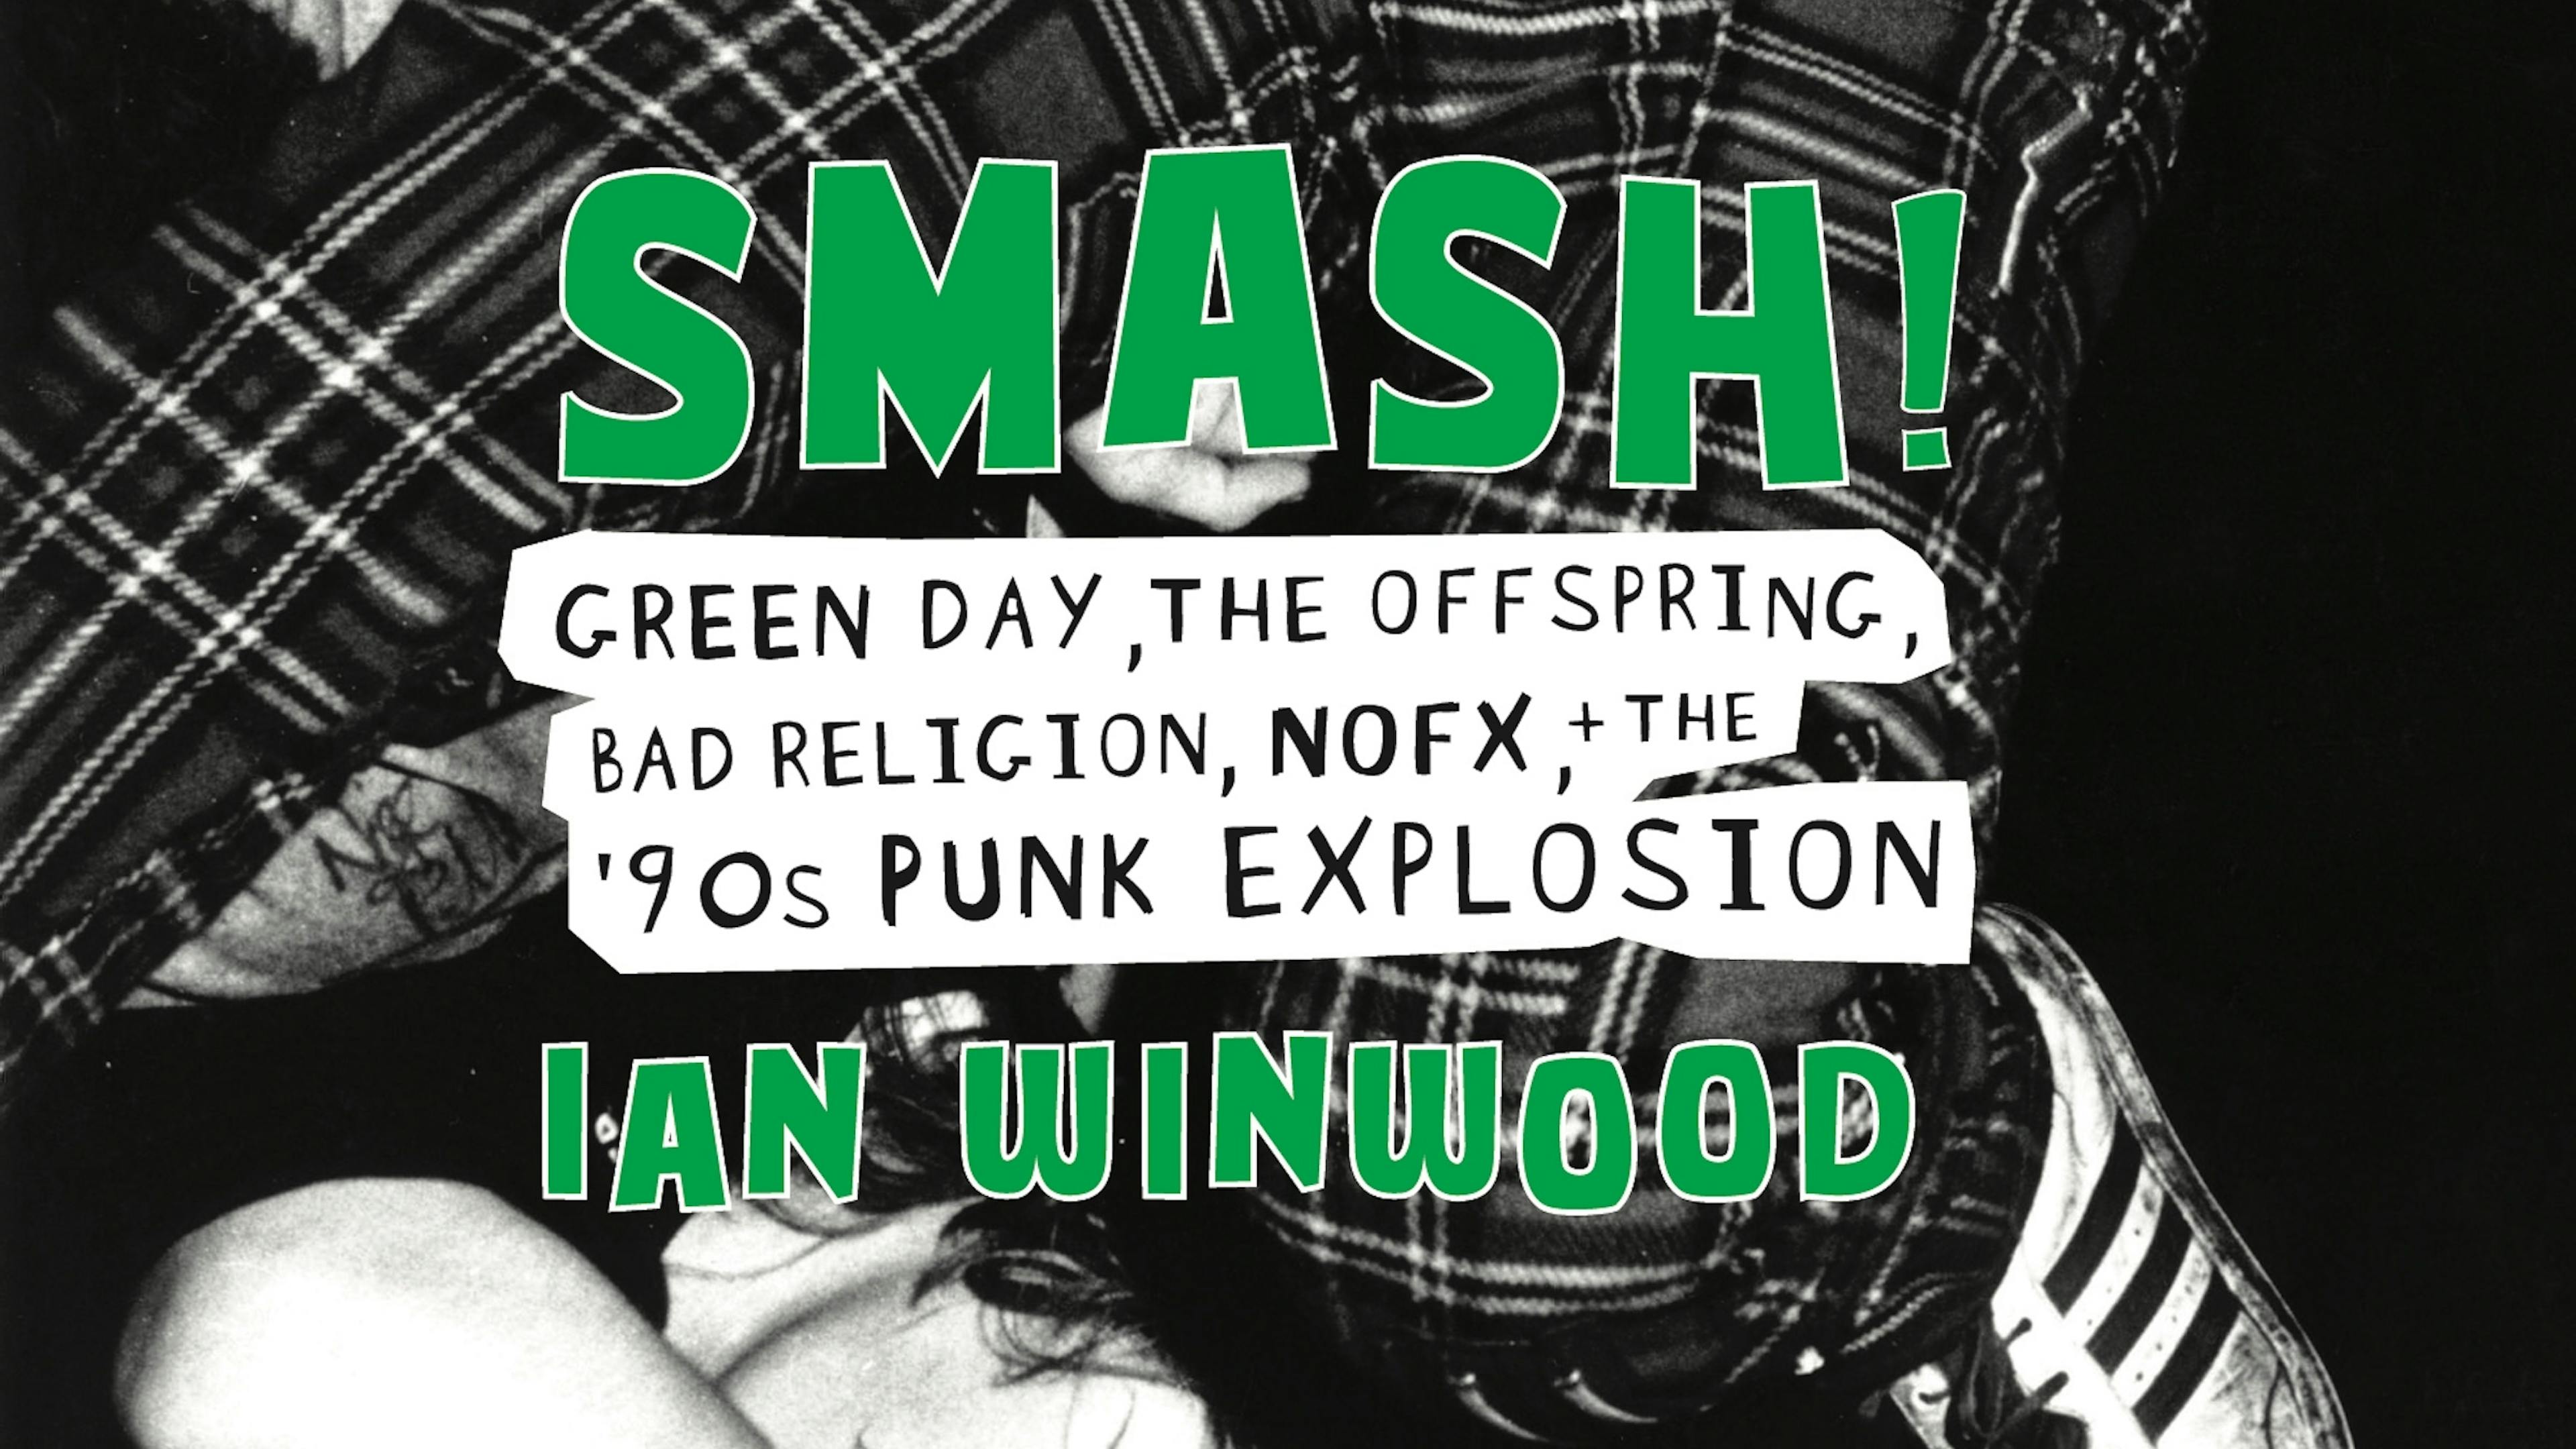 11 Things We Learned About ’90s Punk From The New Tell-All Book, Smash!